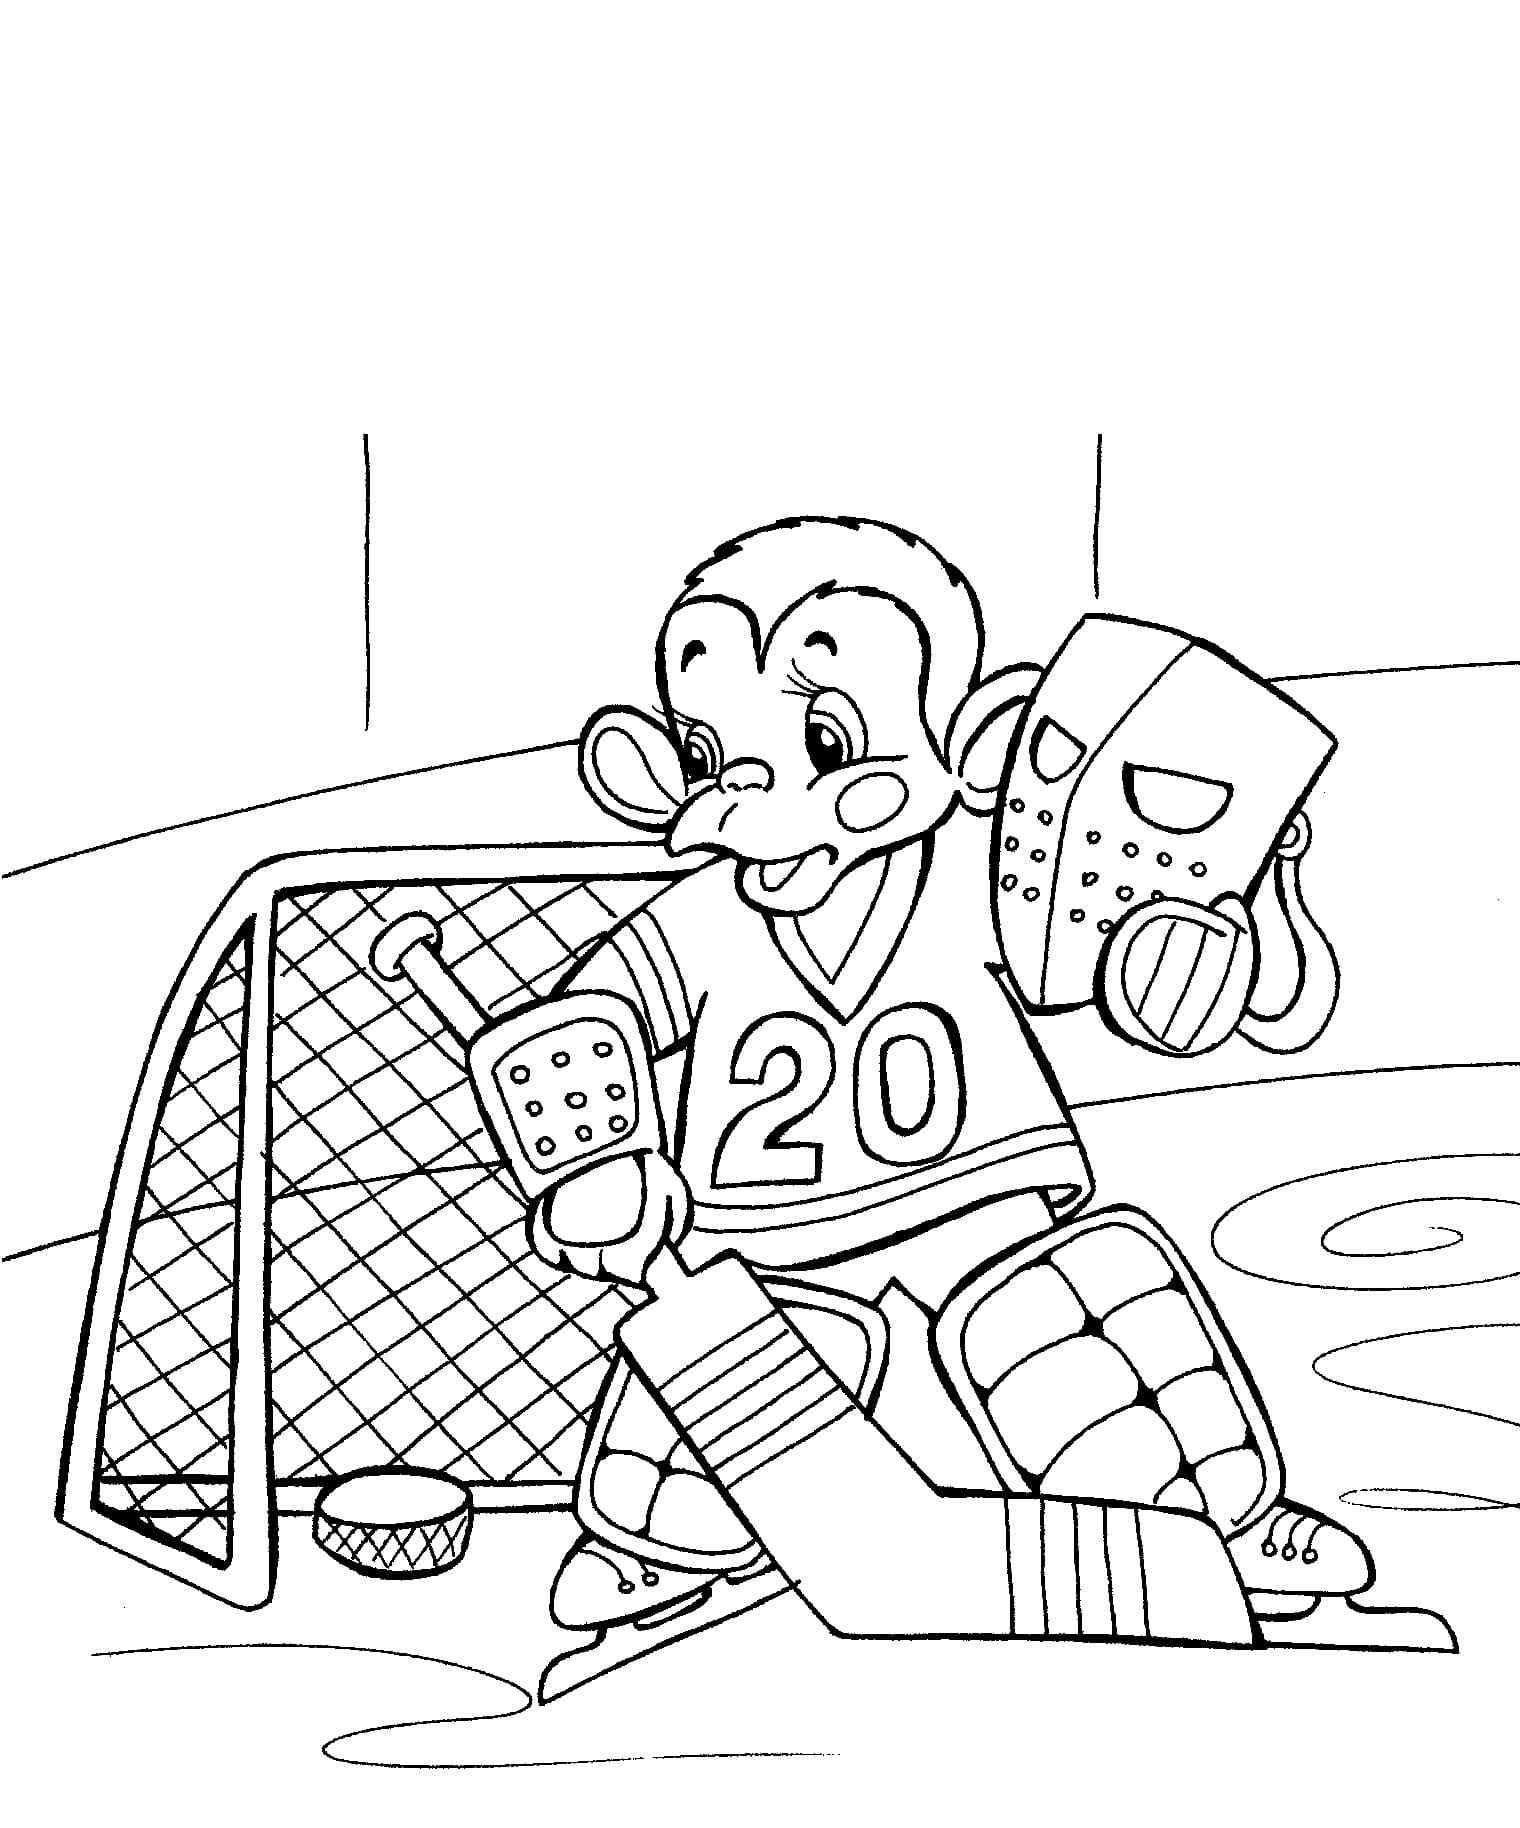 The Monkey At Number Coloring Page